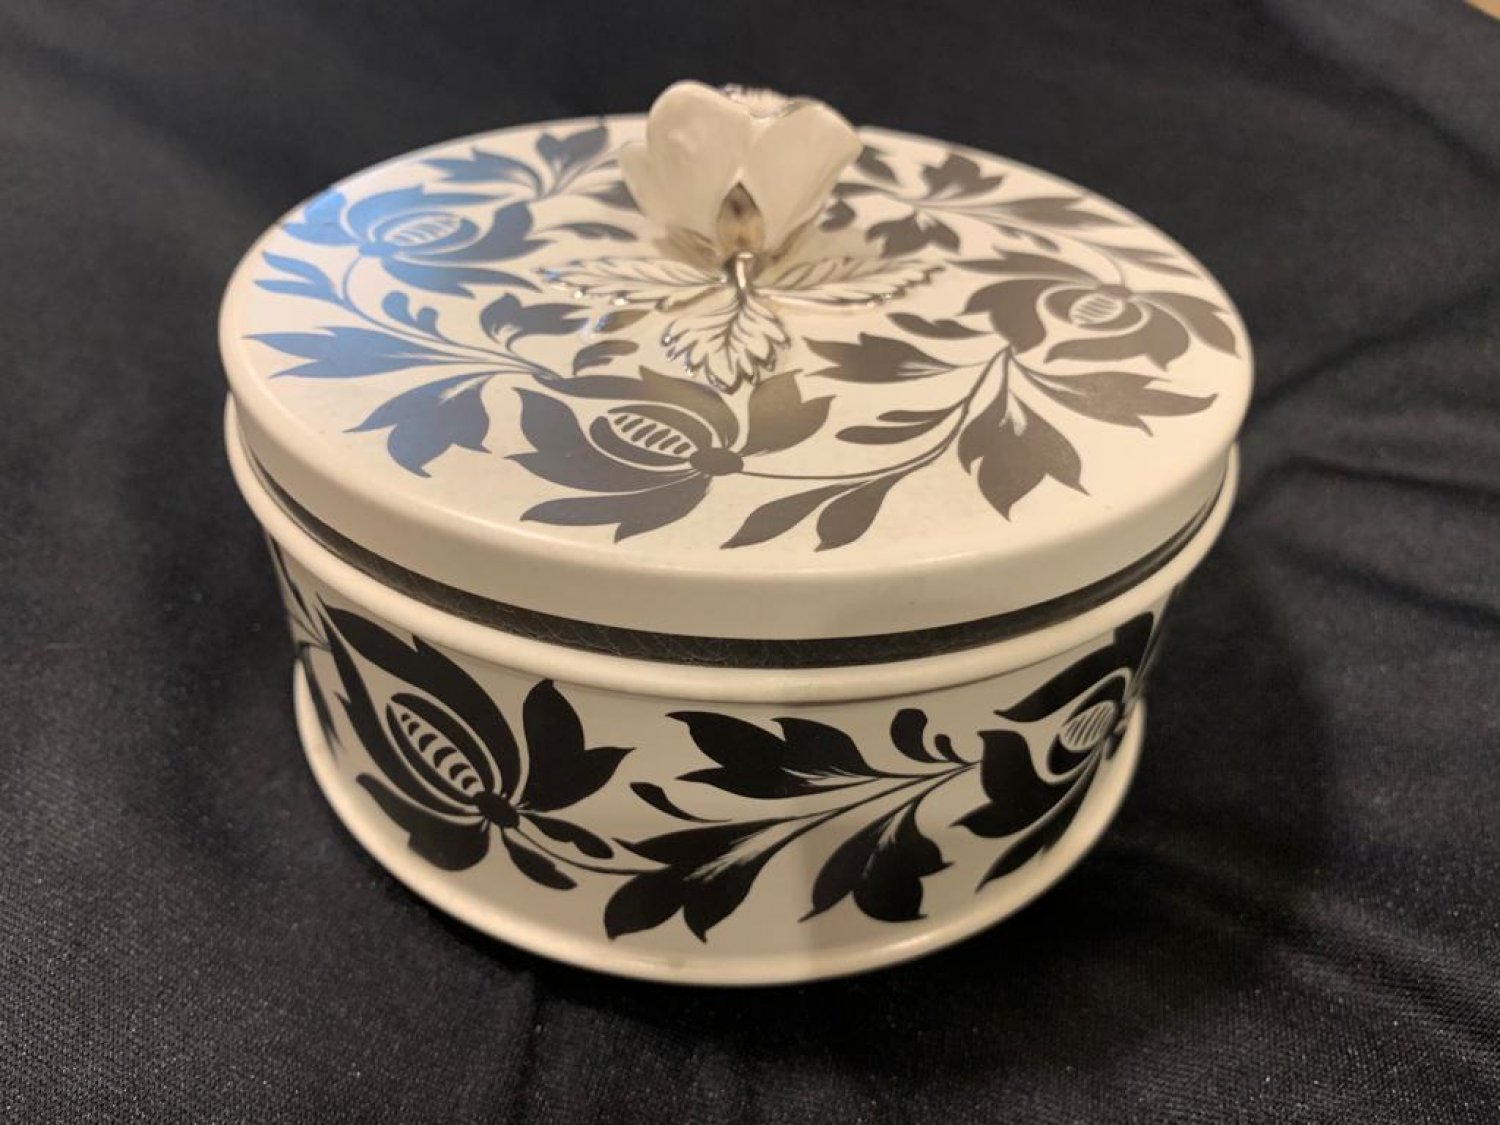 Wedgwood circular covered box with floral finial